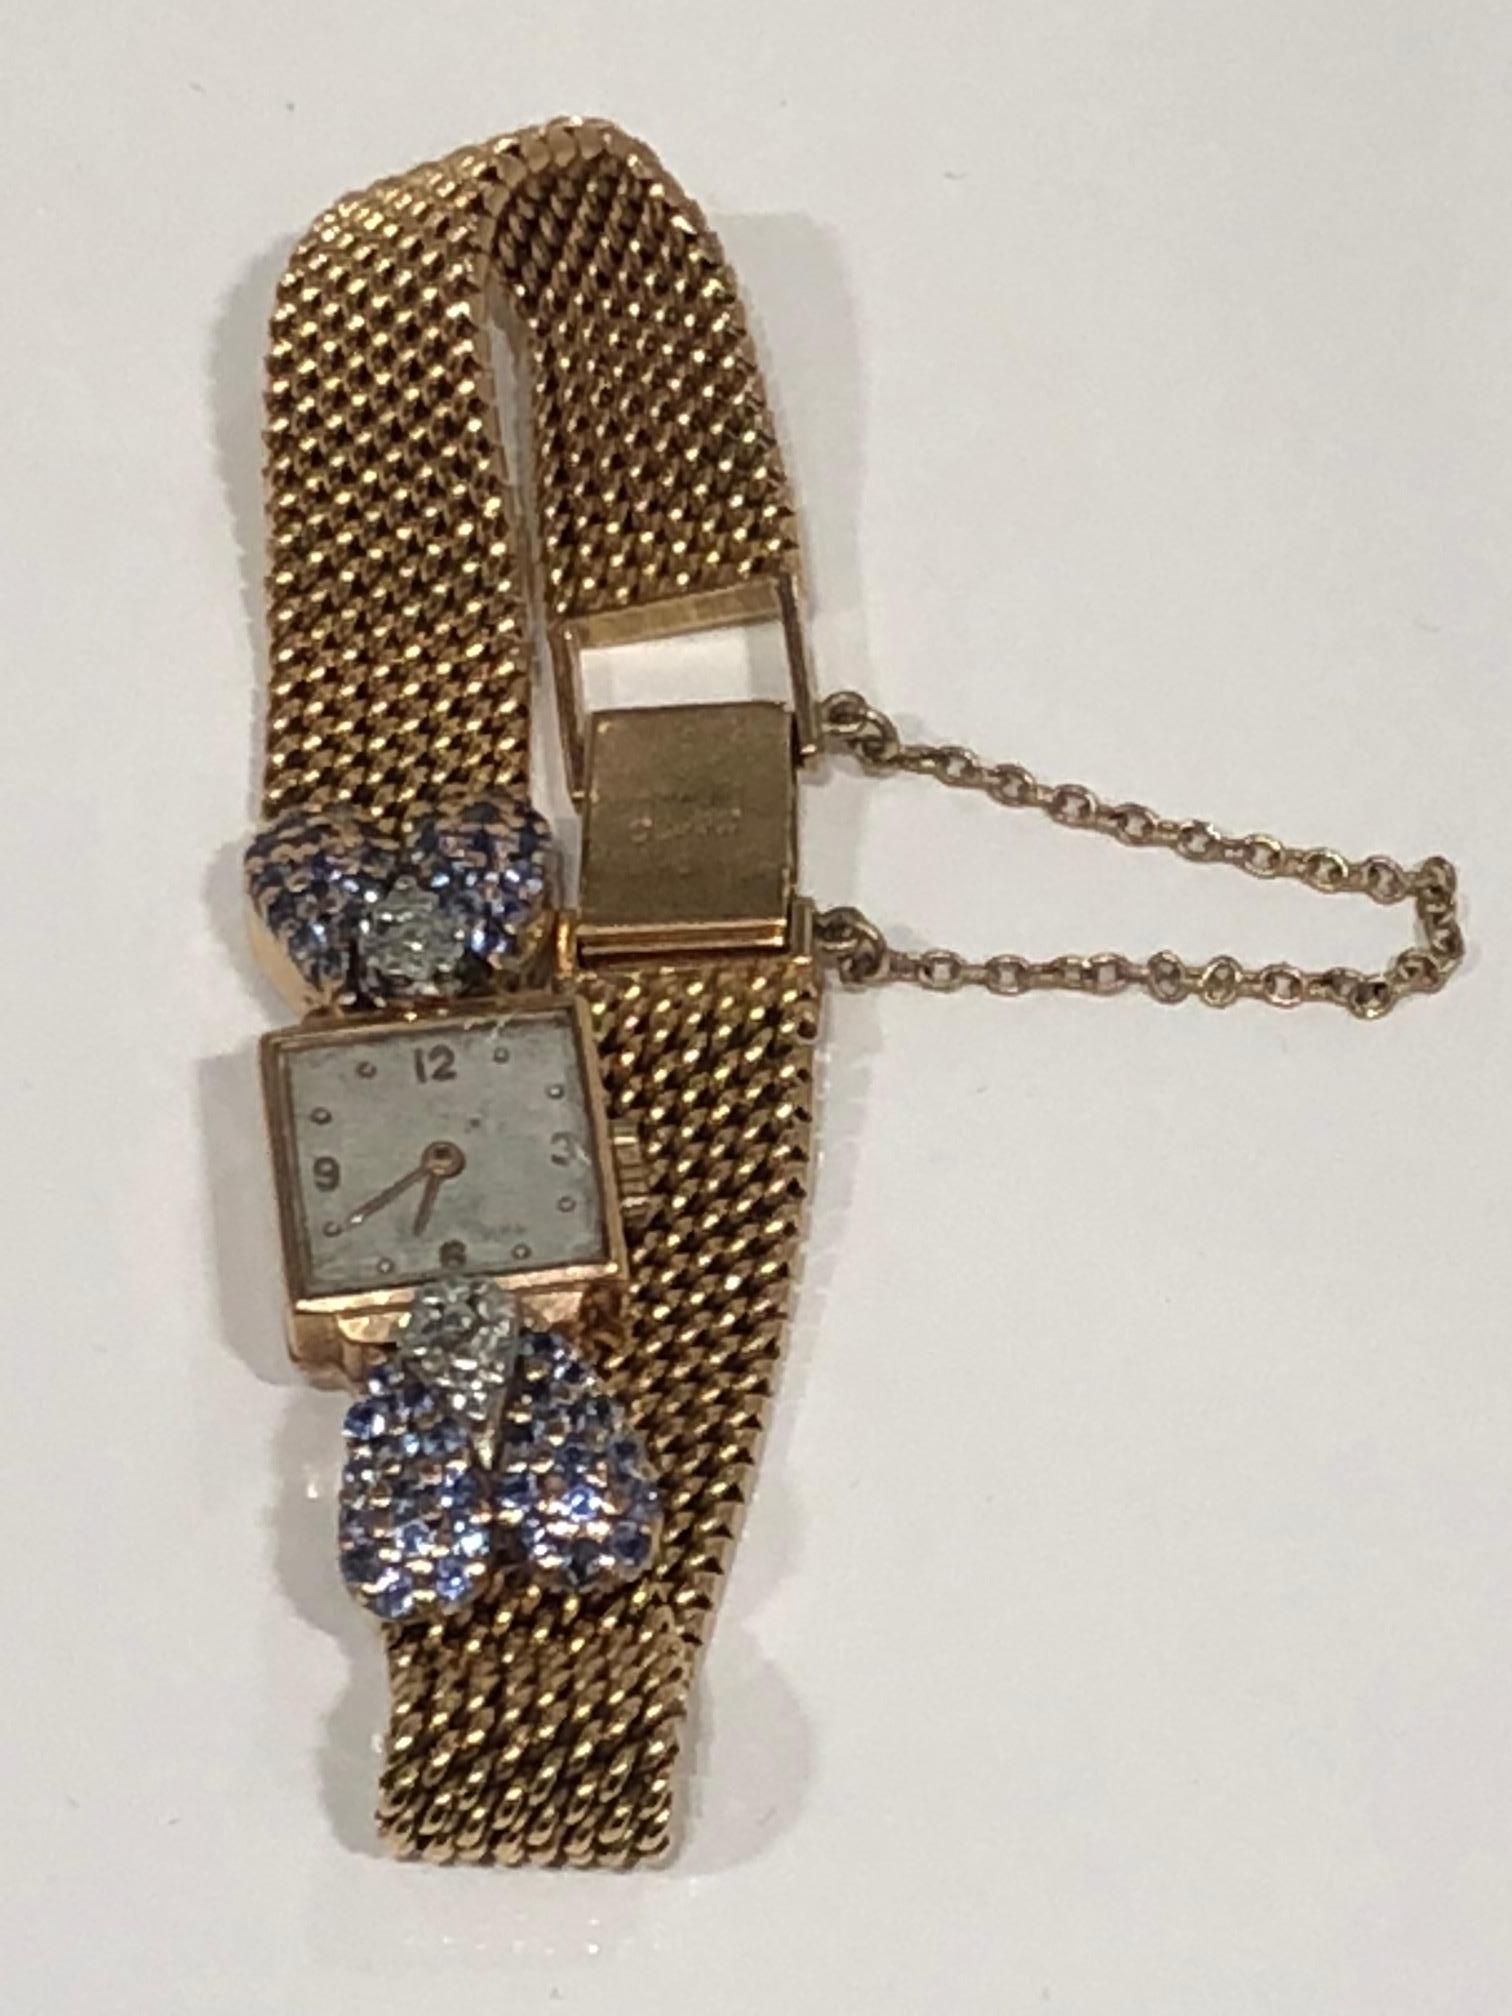 Vintage 18k gold ladies wrist watch, square face with gold weave chain band with diamond and ceylon sapphire encrusted details, clasp closure with security chain, stamped and numbered. circa 1940
Wrist band measures 7